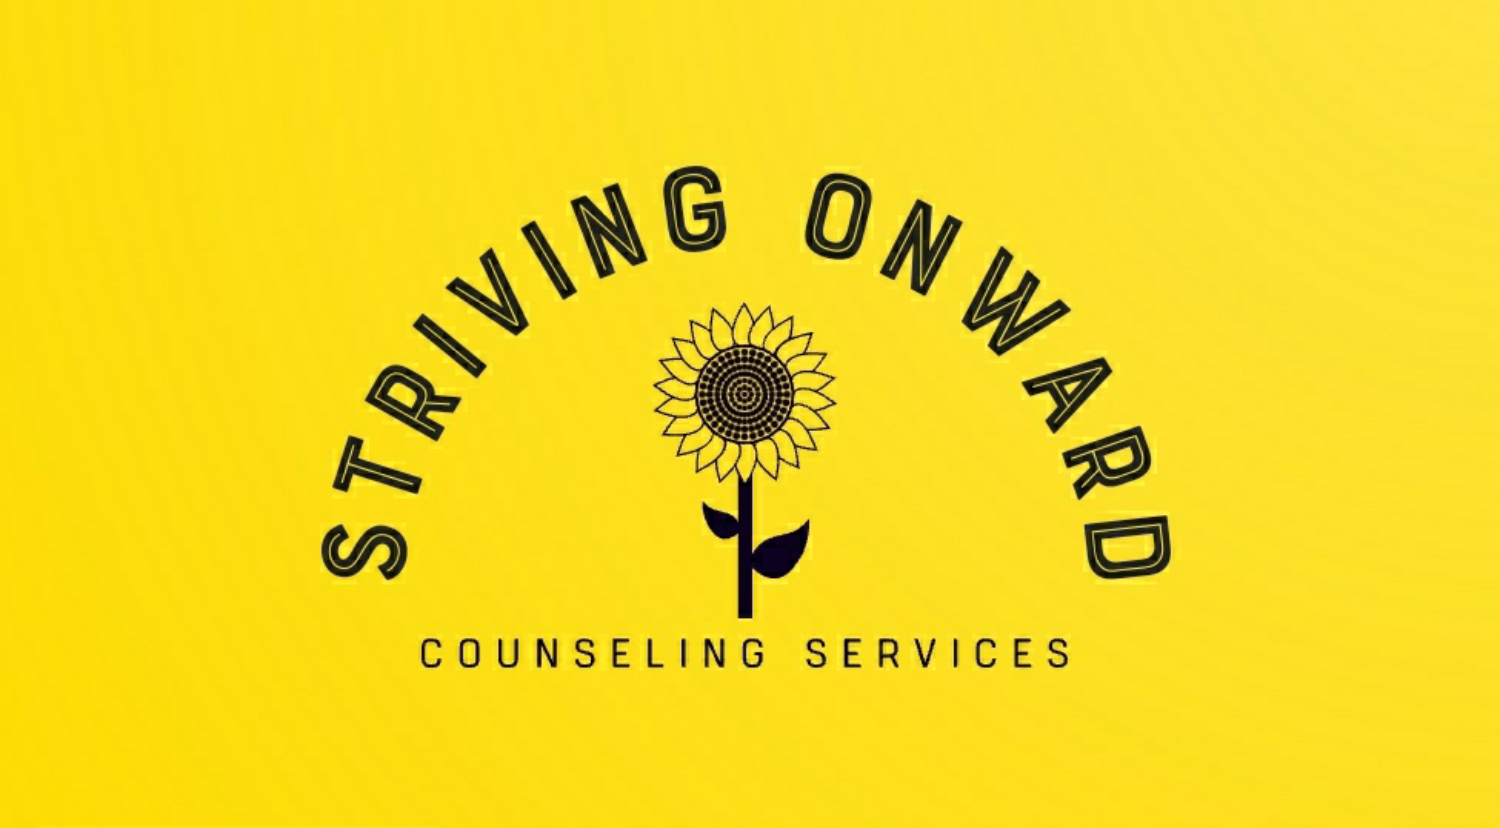 Gallery Photo of Welcome to Striving Onward! 

I am equipped to help you continue striving onward to freedom from developmental wounds, adverse experiences, & trauma! 